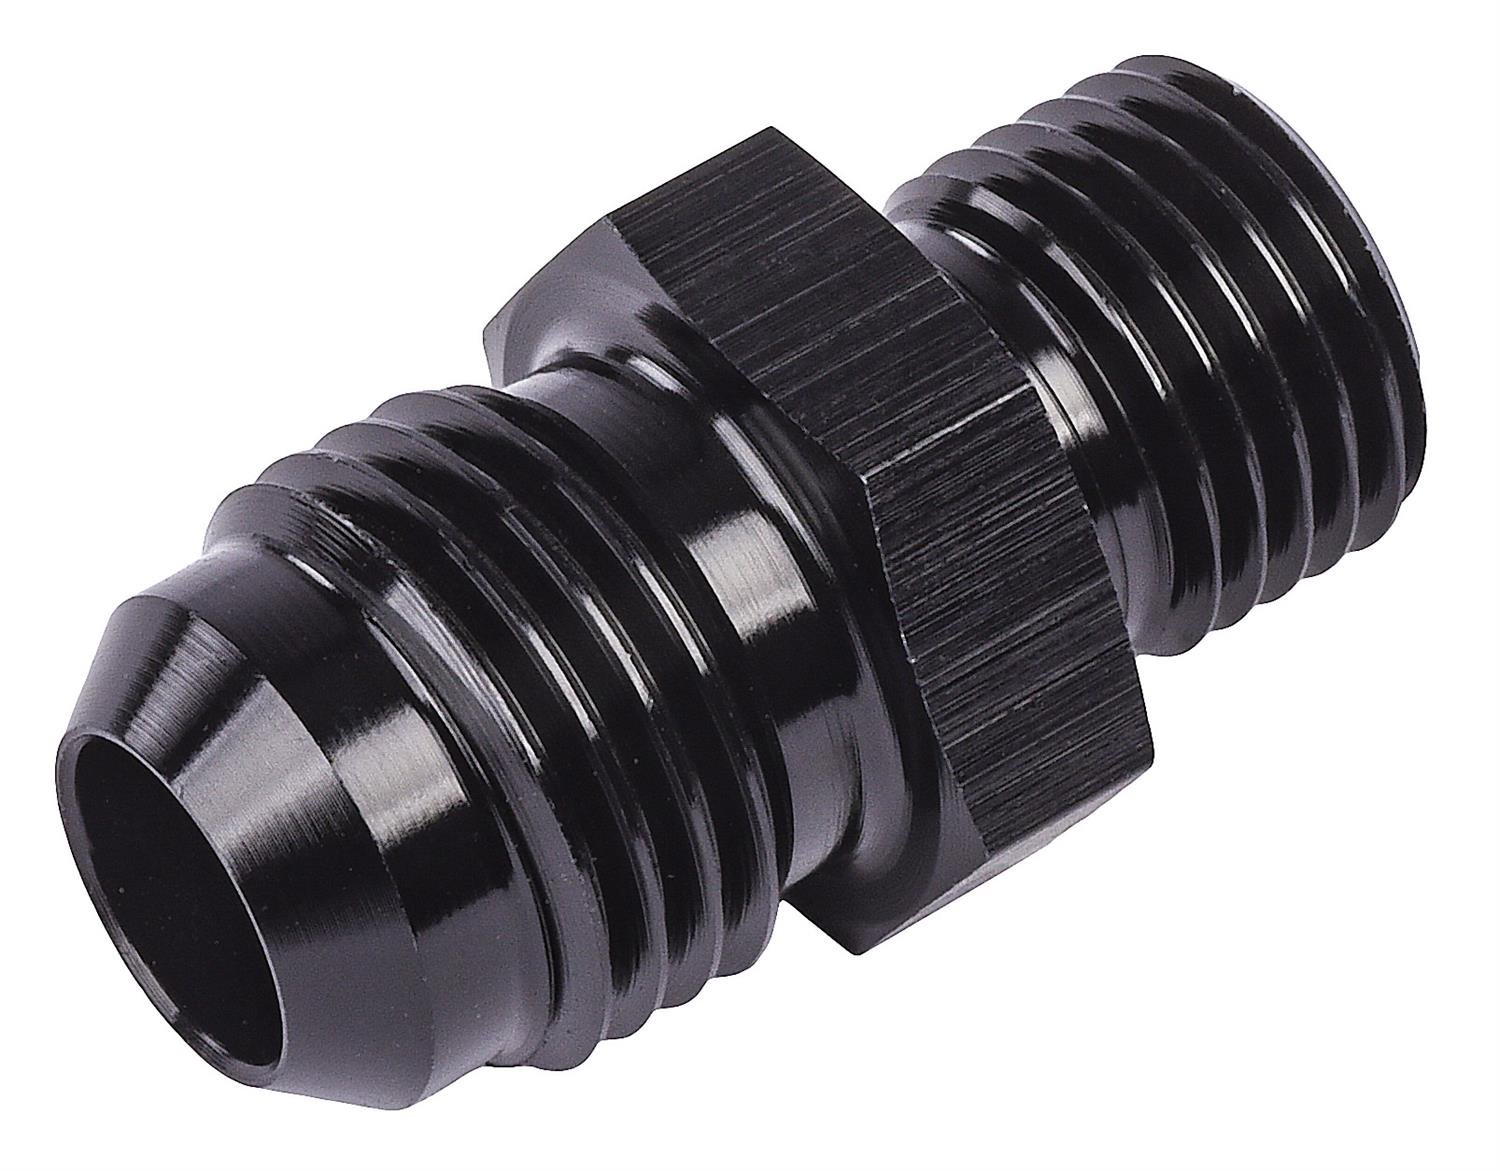 AN to Metric Adapter Fitting [-6 AN Male to 12mm x 1.25 Male, Black]